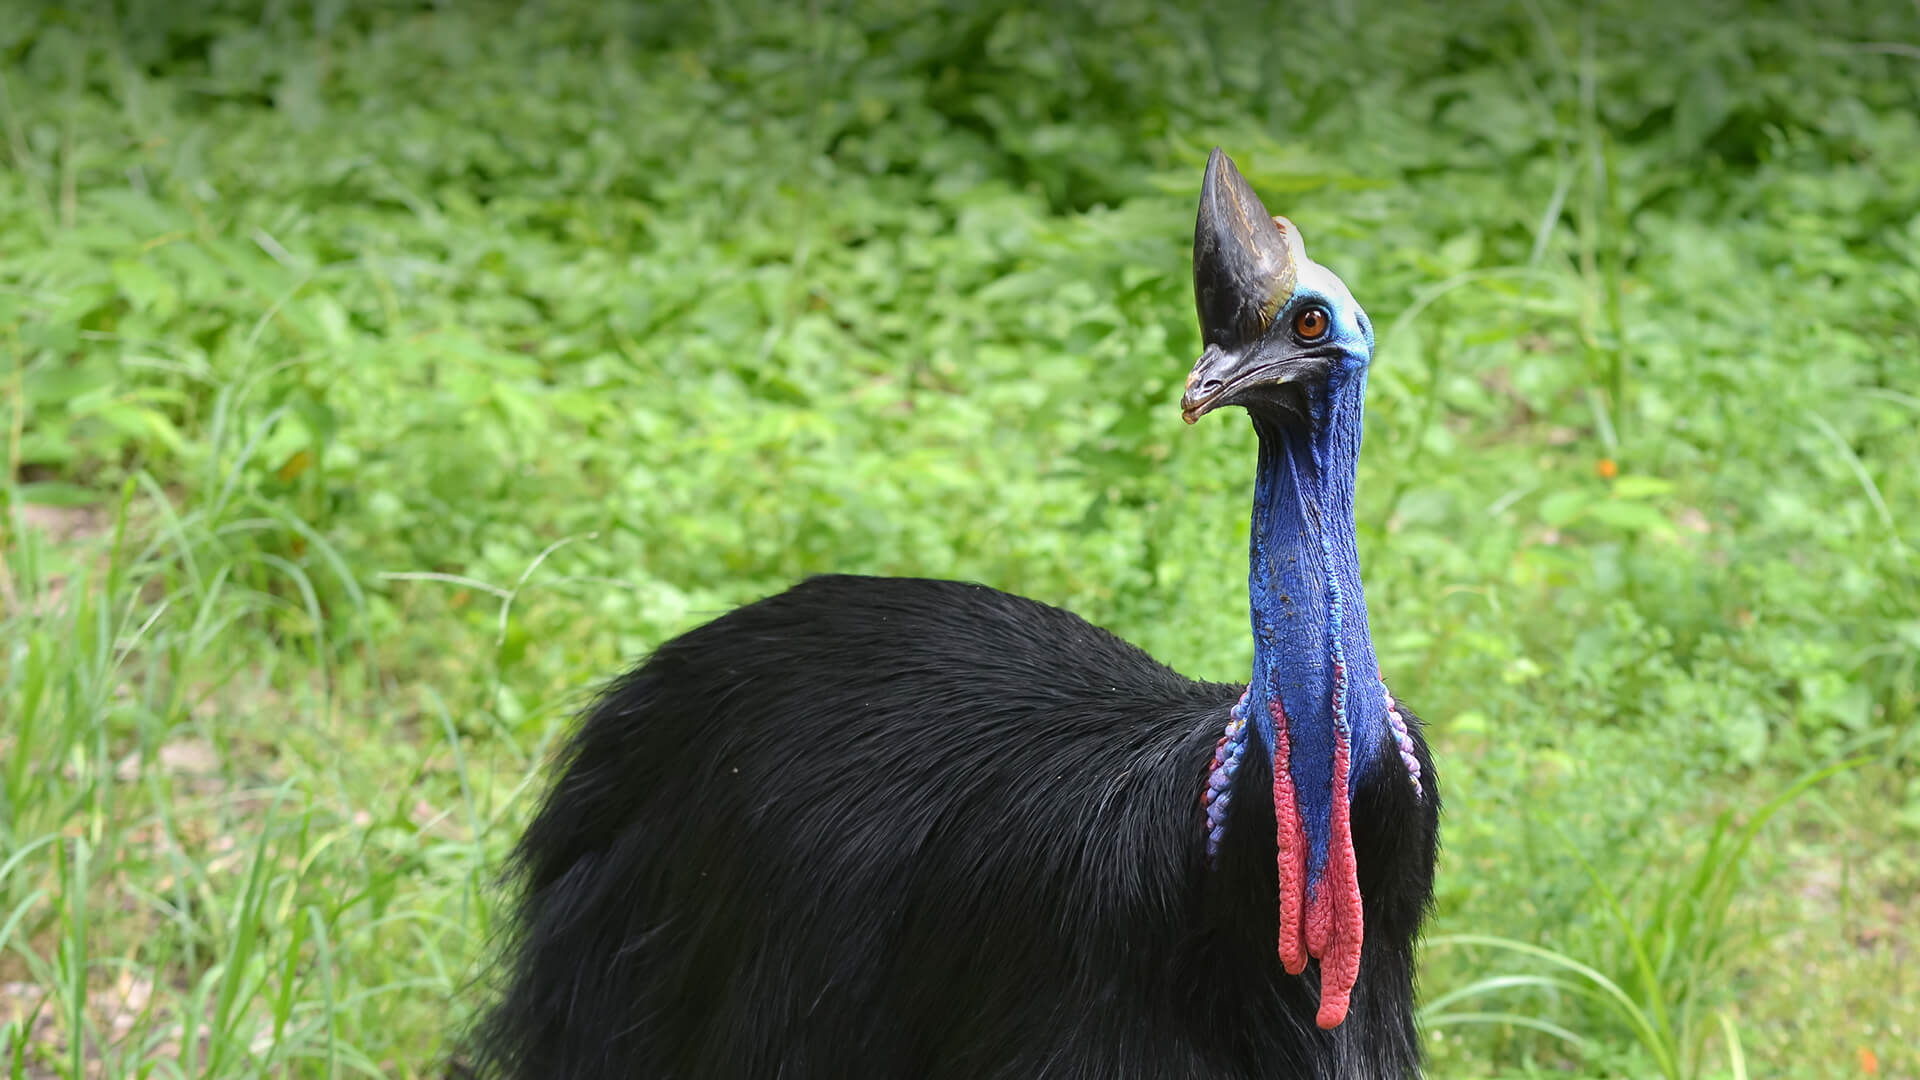 Cassowary standing in front of green grassy background